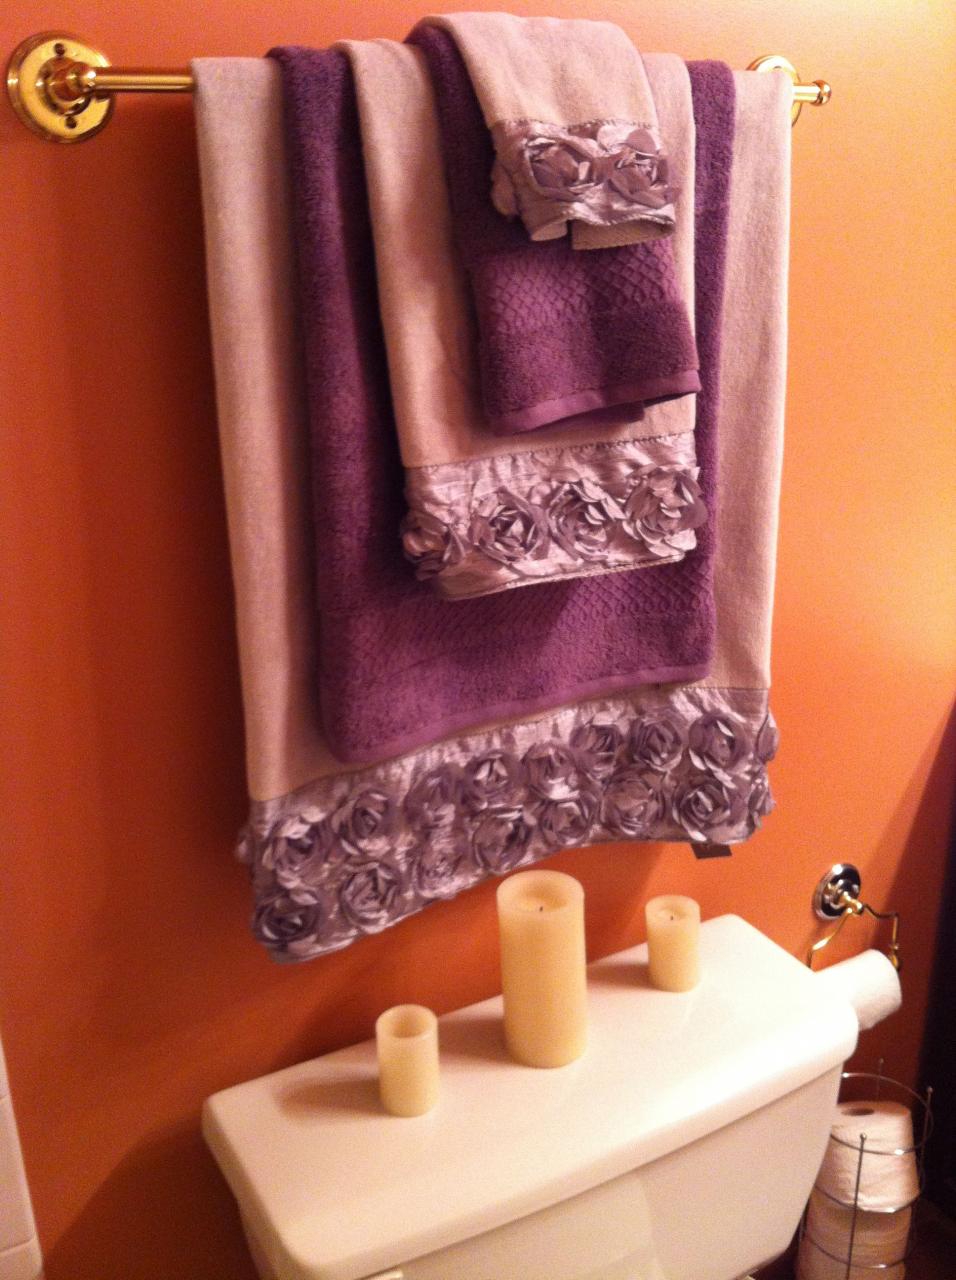 Bathroom update! Nice grey towels with decorative roses and deep purple